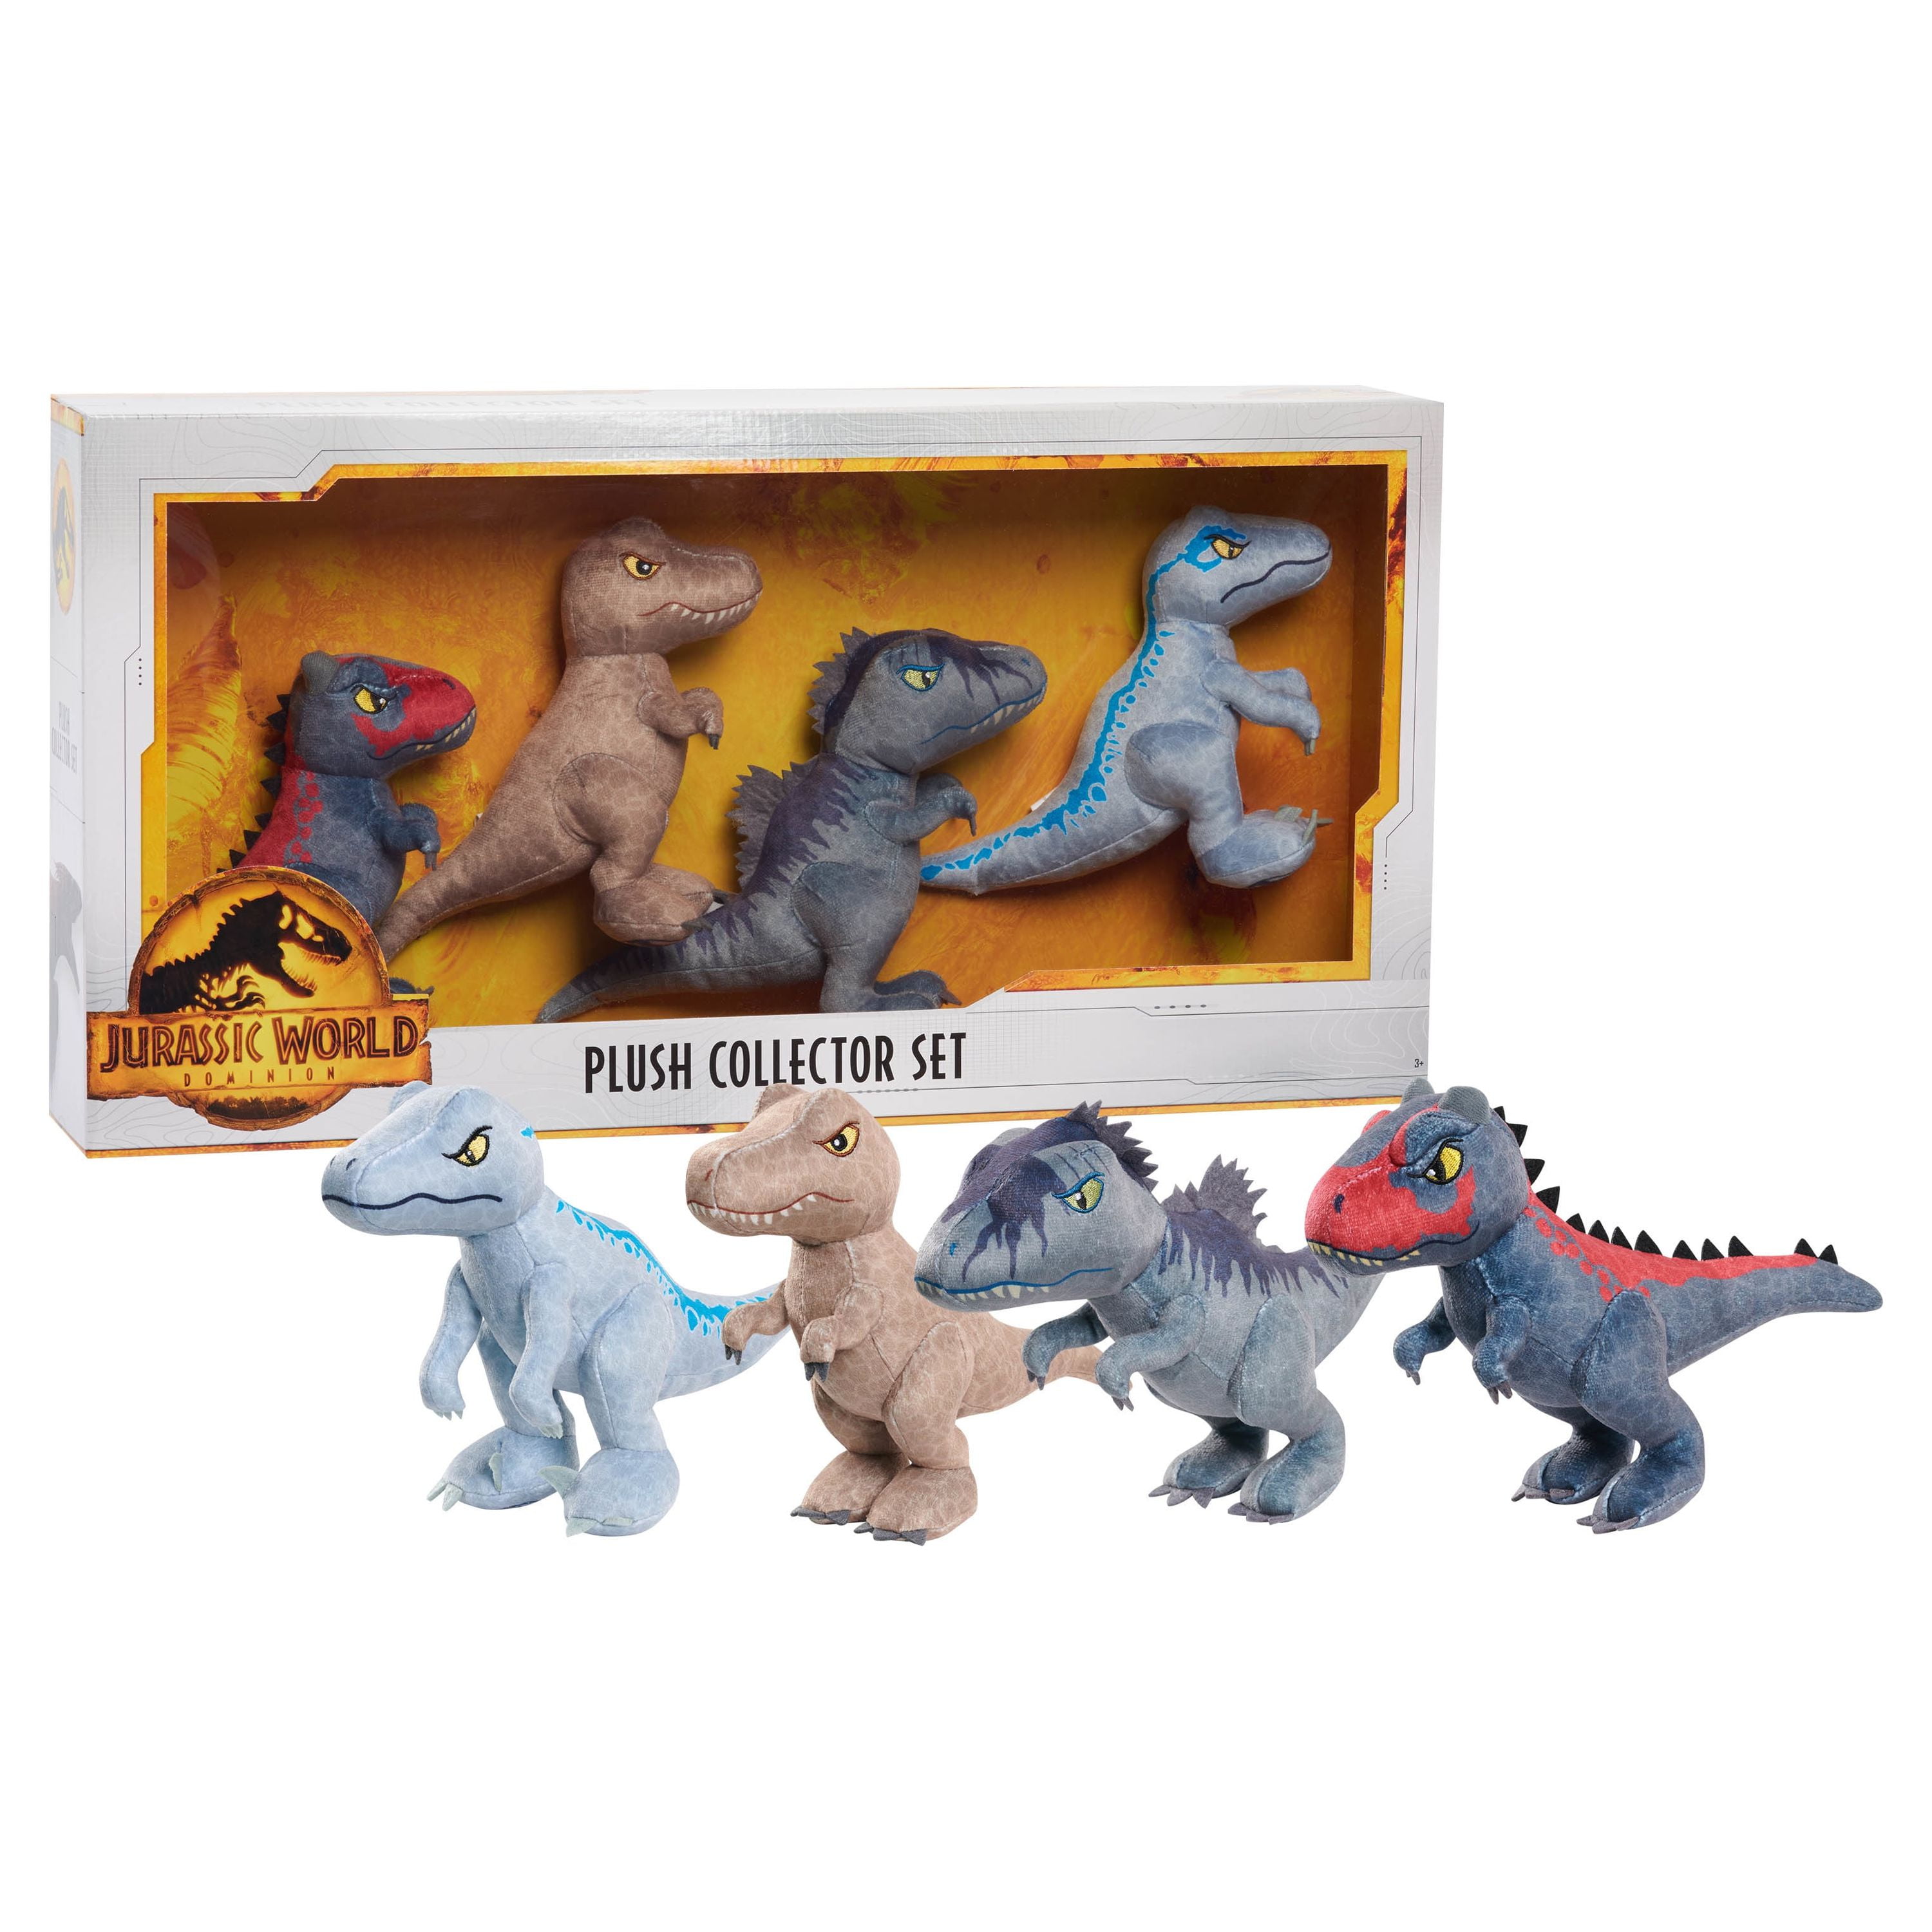 4-Count Just Play Jurassic World 7" Dinosaur Plush Collector Set $9.97 ($2.49 Each) + Free Shipping w/ Walmart+ or on $35+